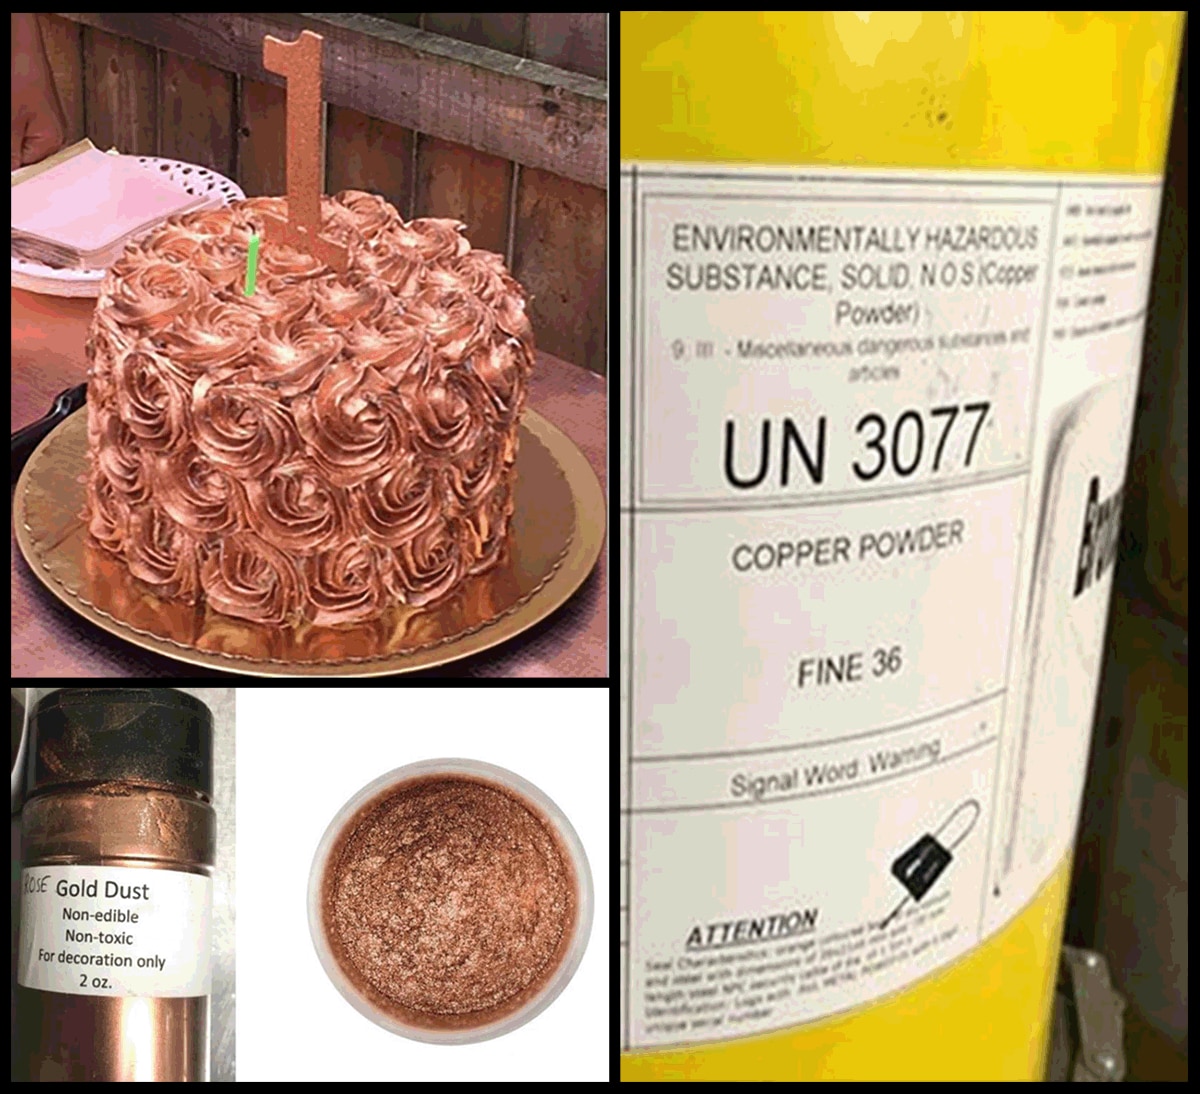 Figure shows images of a birthday cake decorated with rose gold dust frosting, a bottle of gold dust used for cake decorating, and industrial drums containing fine copper powder.